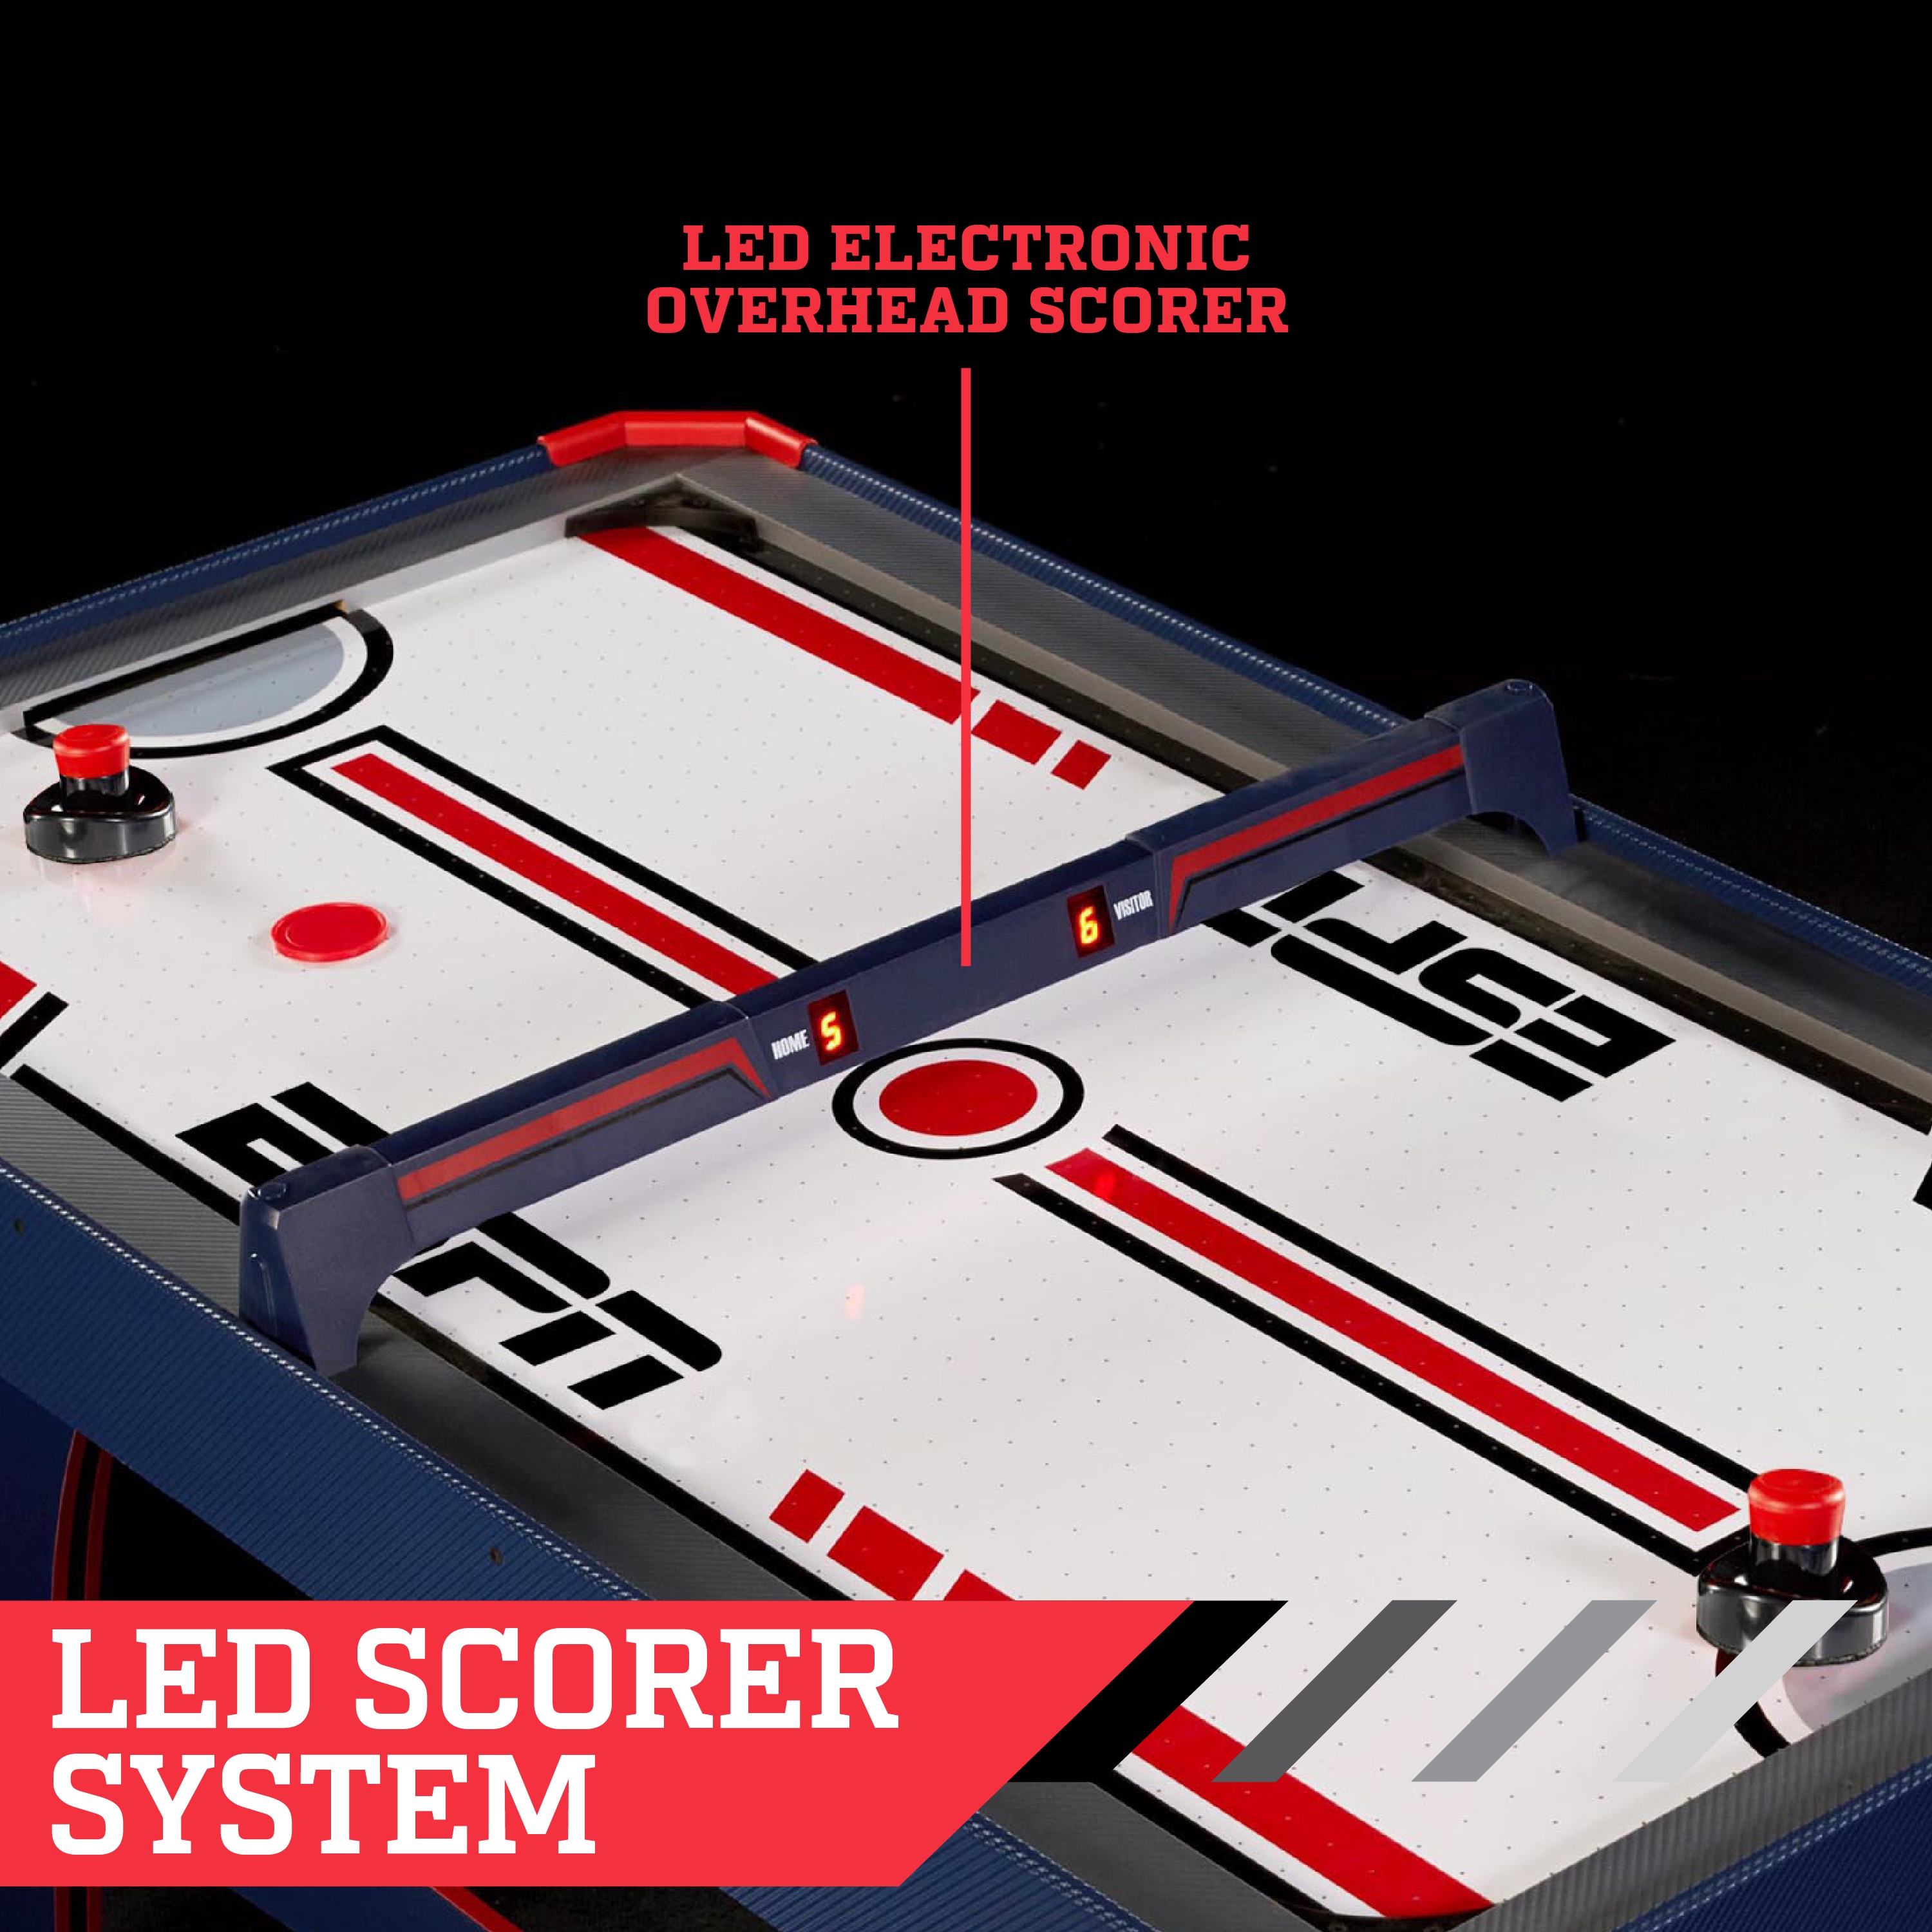 ESPN Air Powered Hockey Table with Overhead Electronic Scorer, 60" x 32" x 32" - image 3 of 11